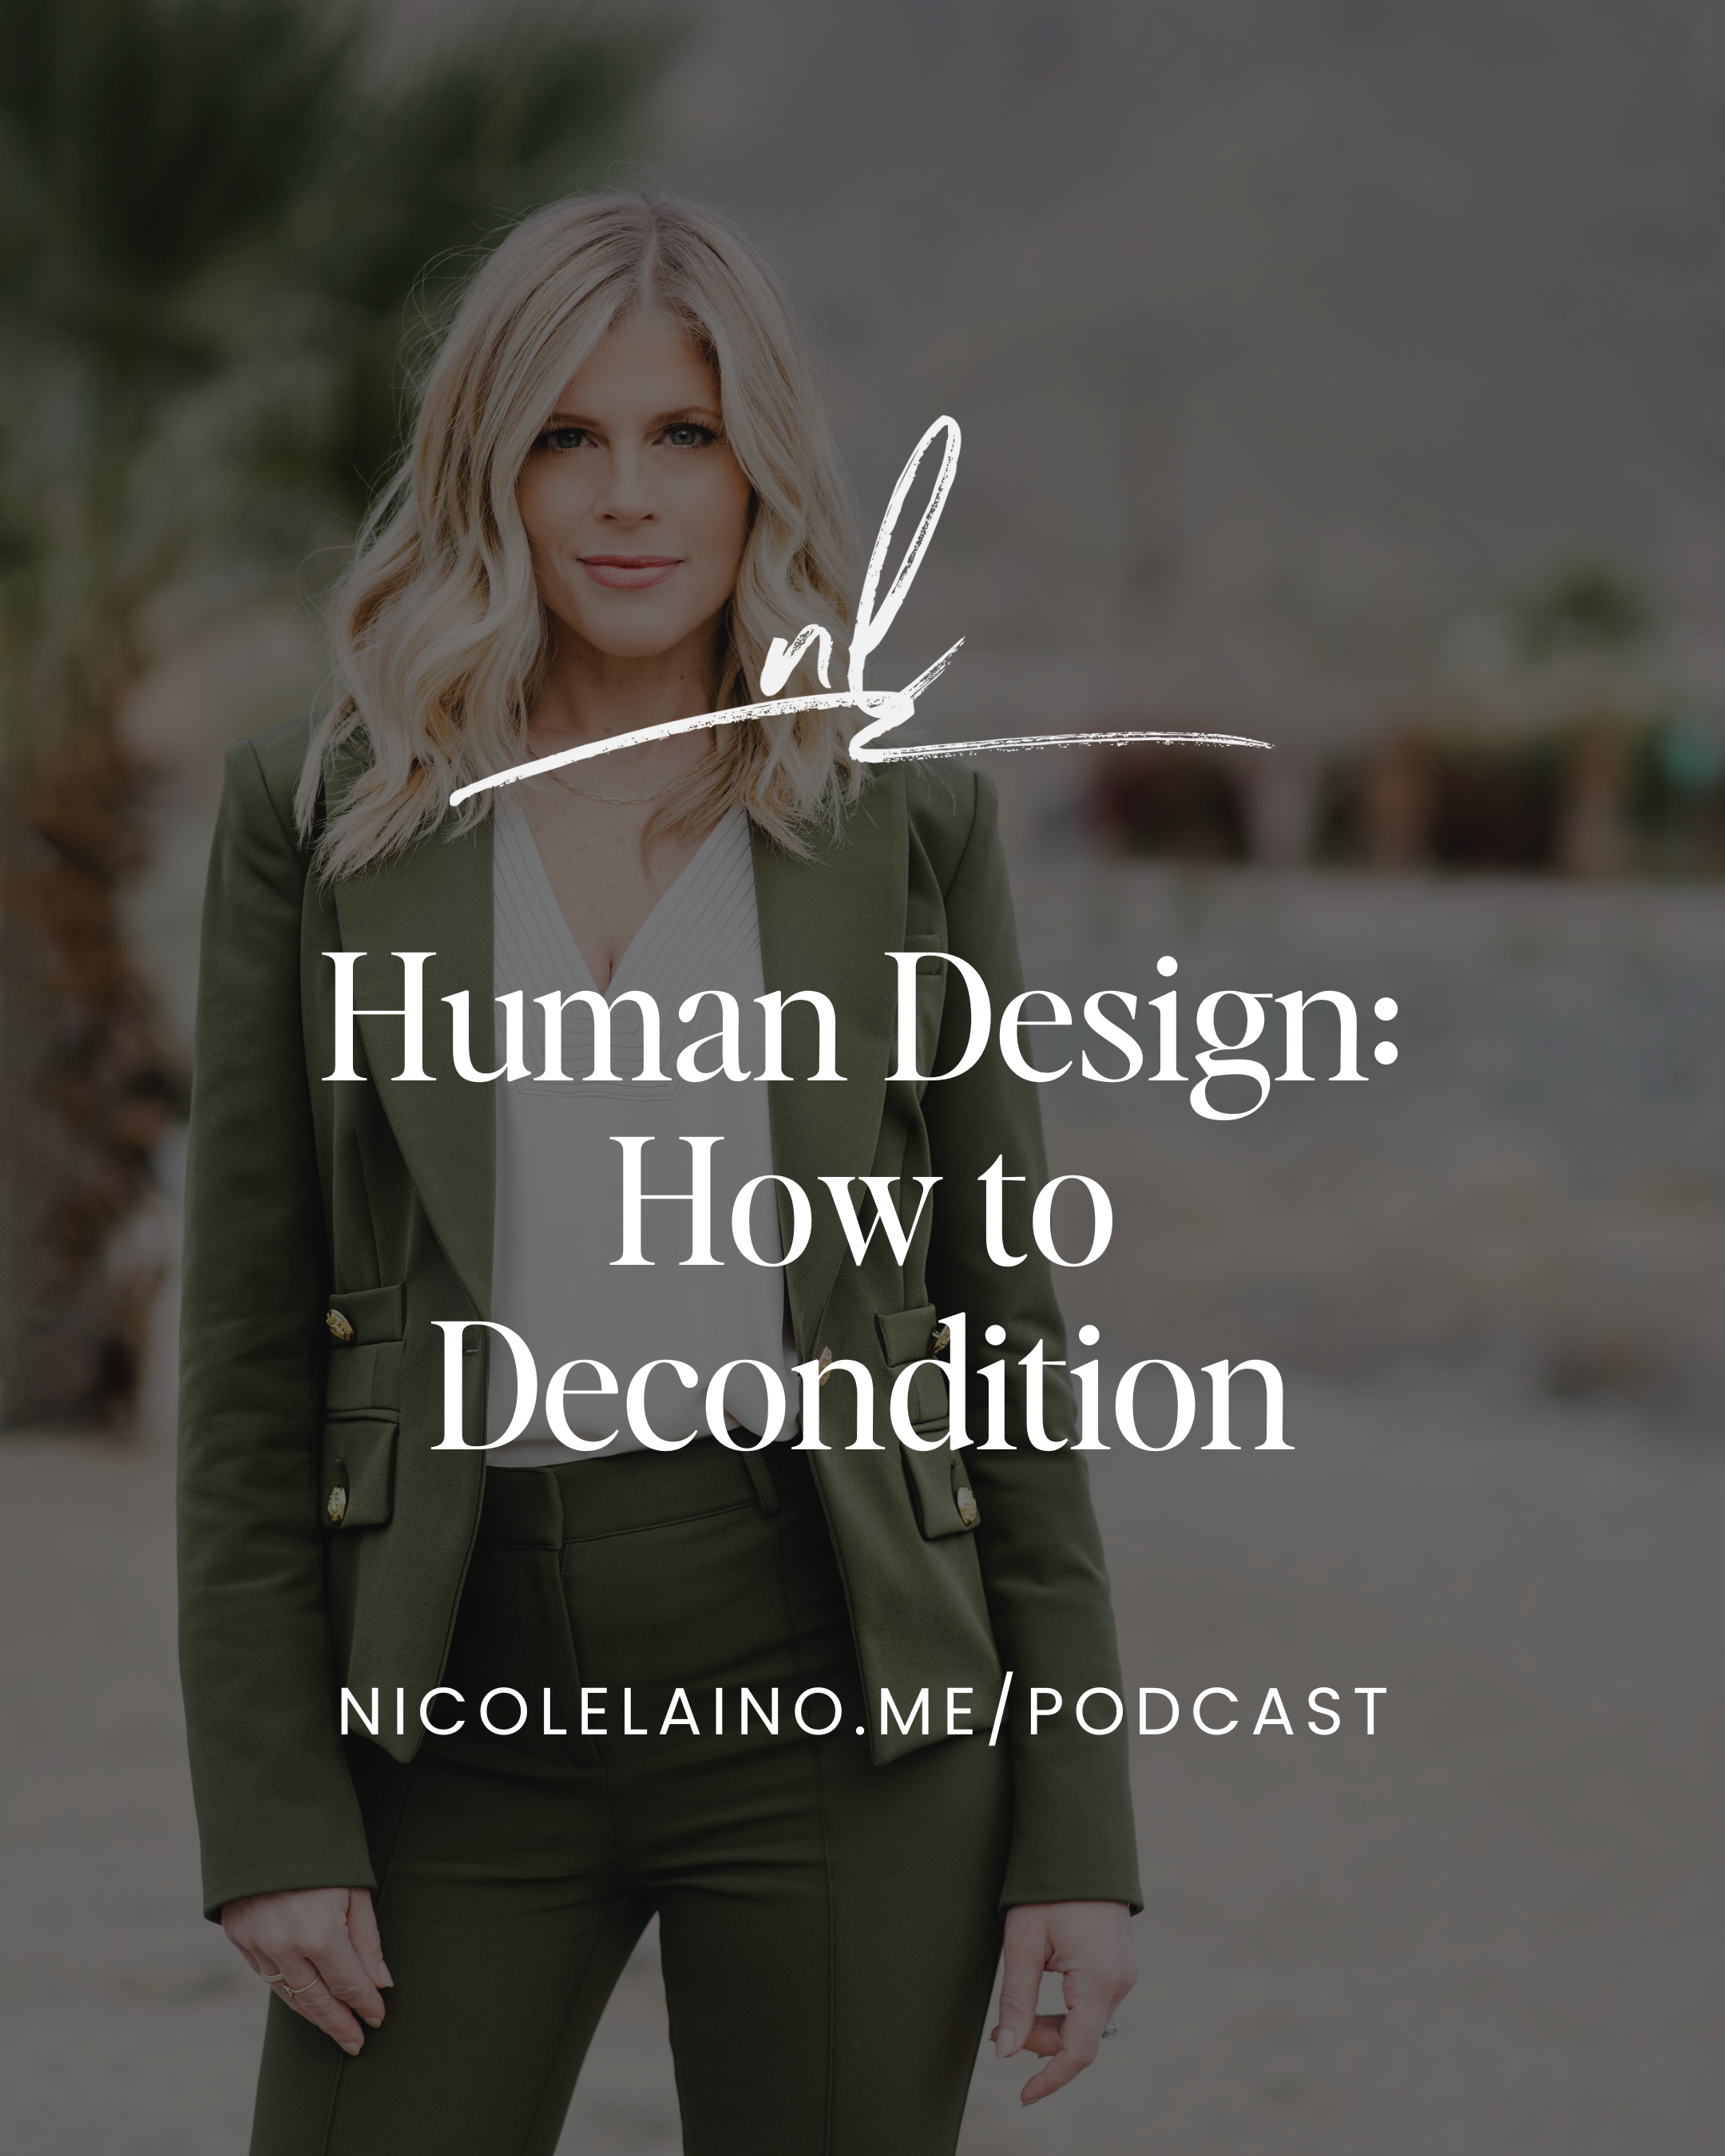 Human Design: How to Decondition